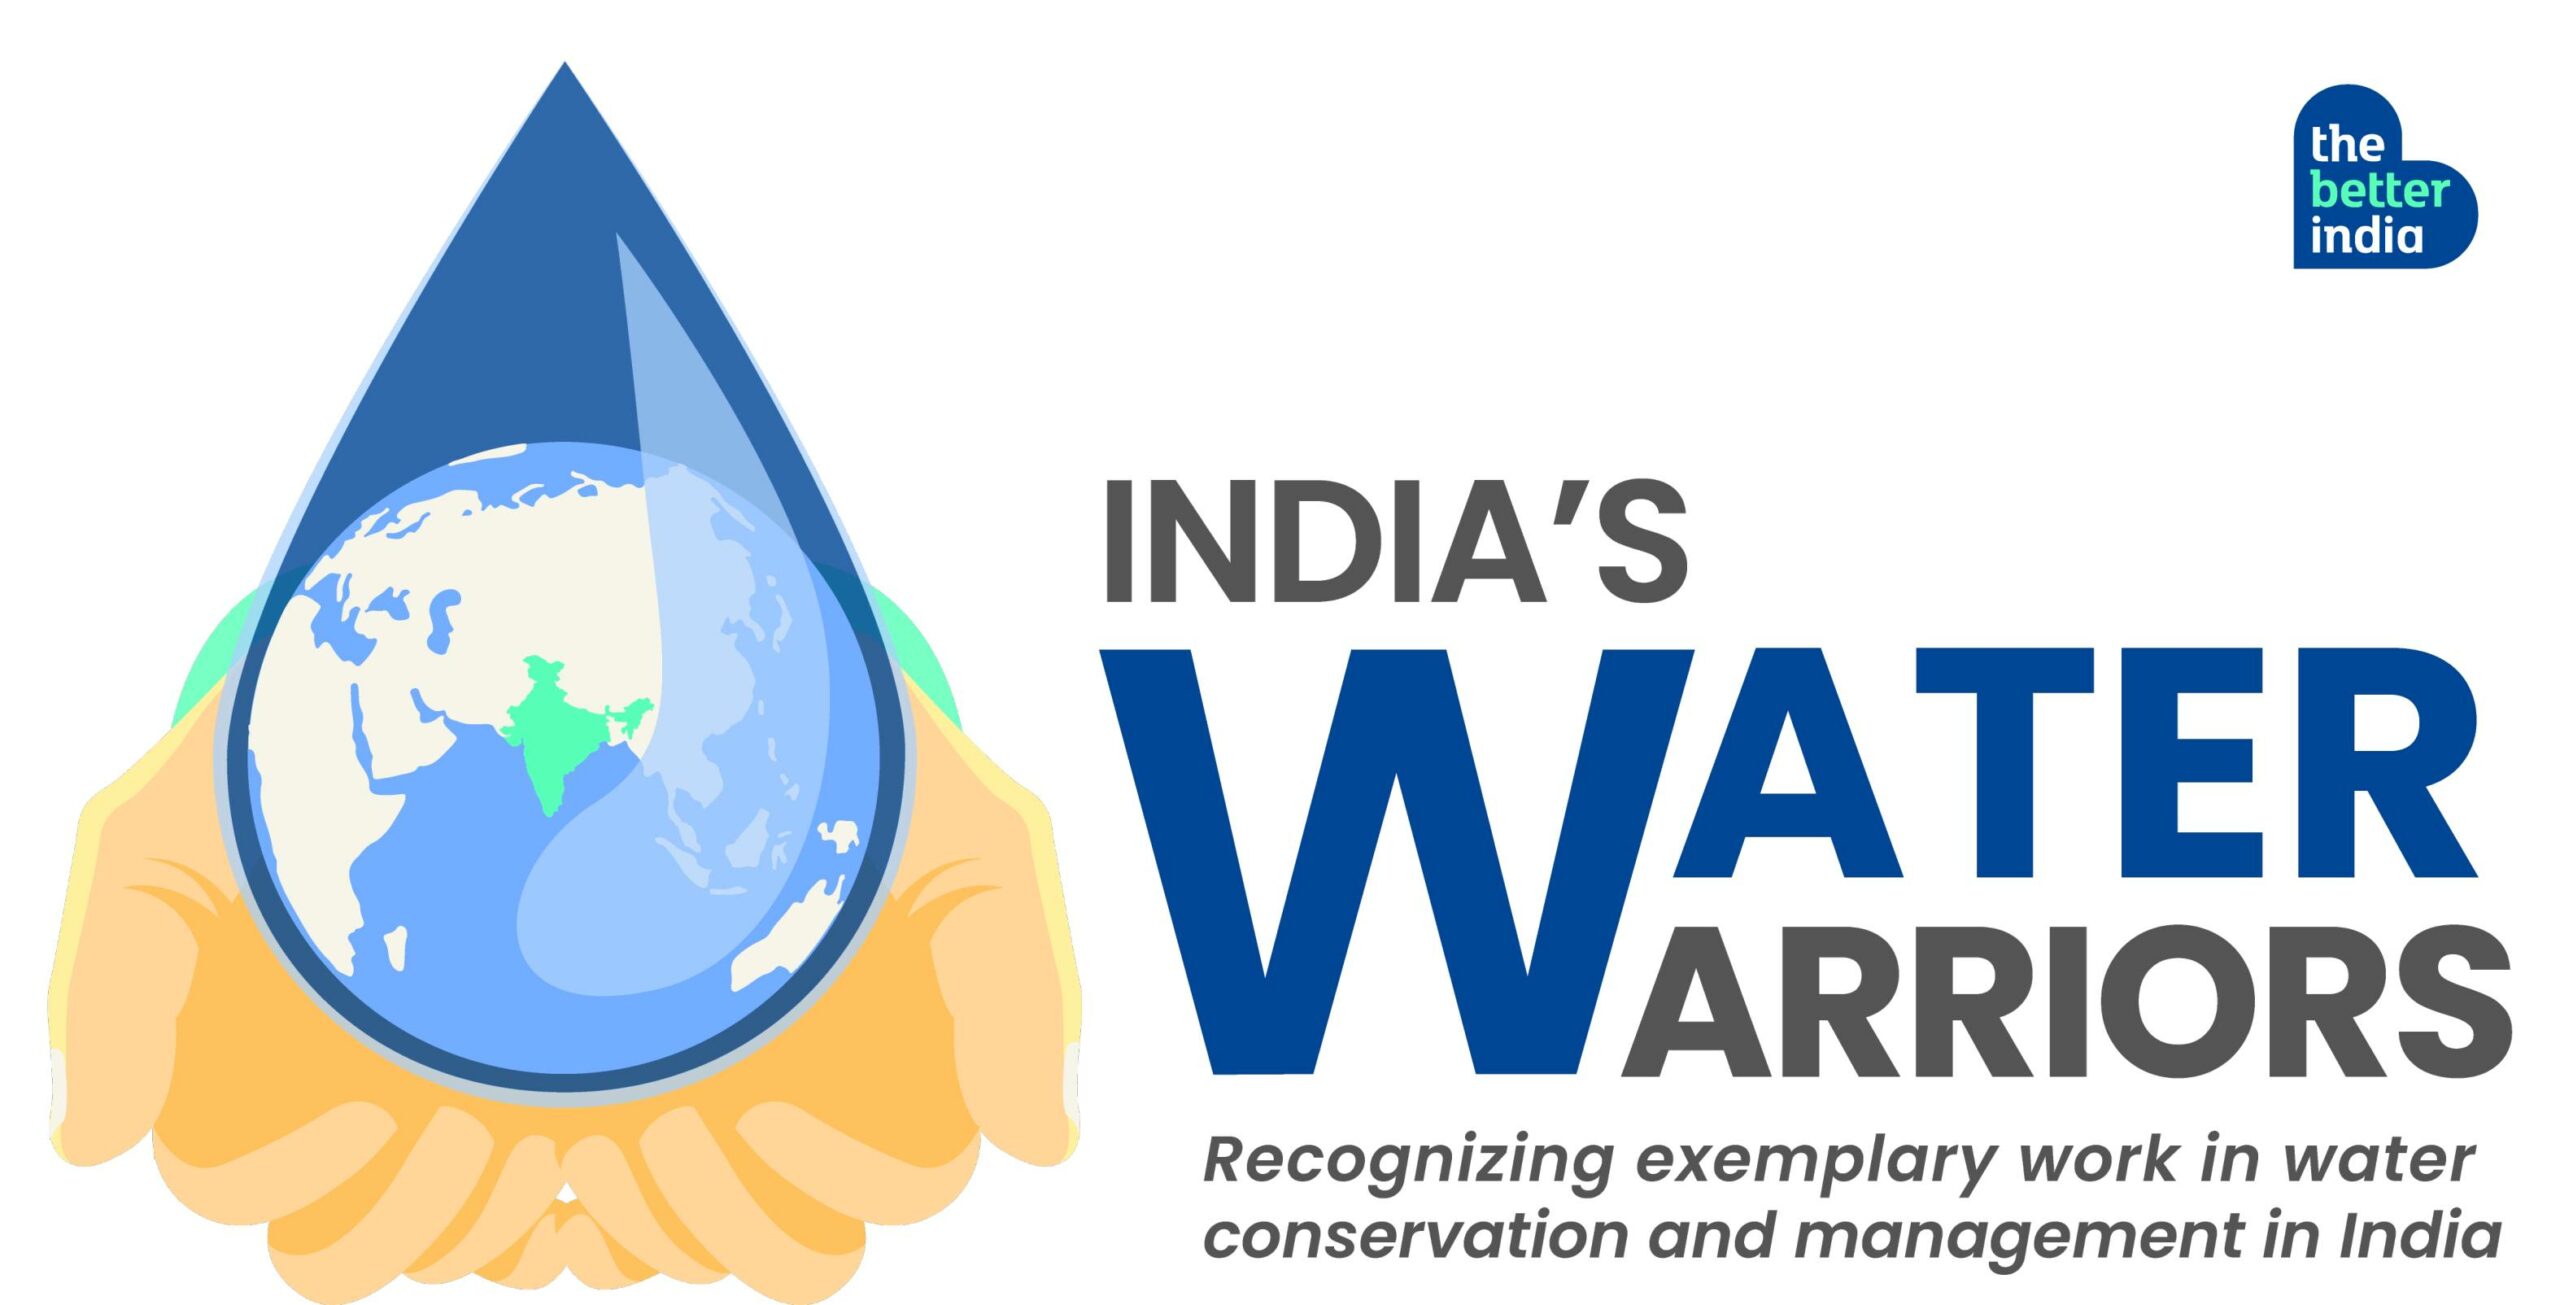 India's water warriors is a first-of-its-kind initiative by The Better India